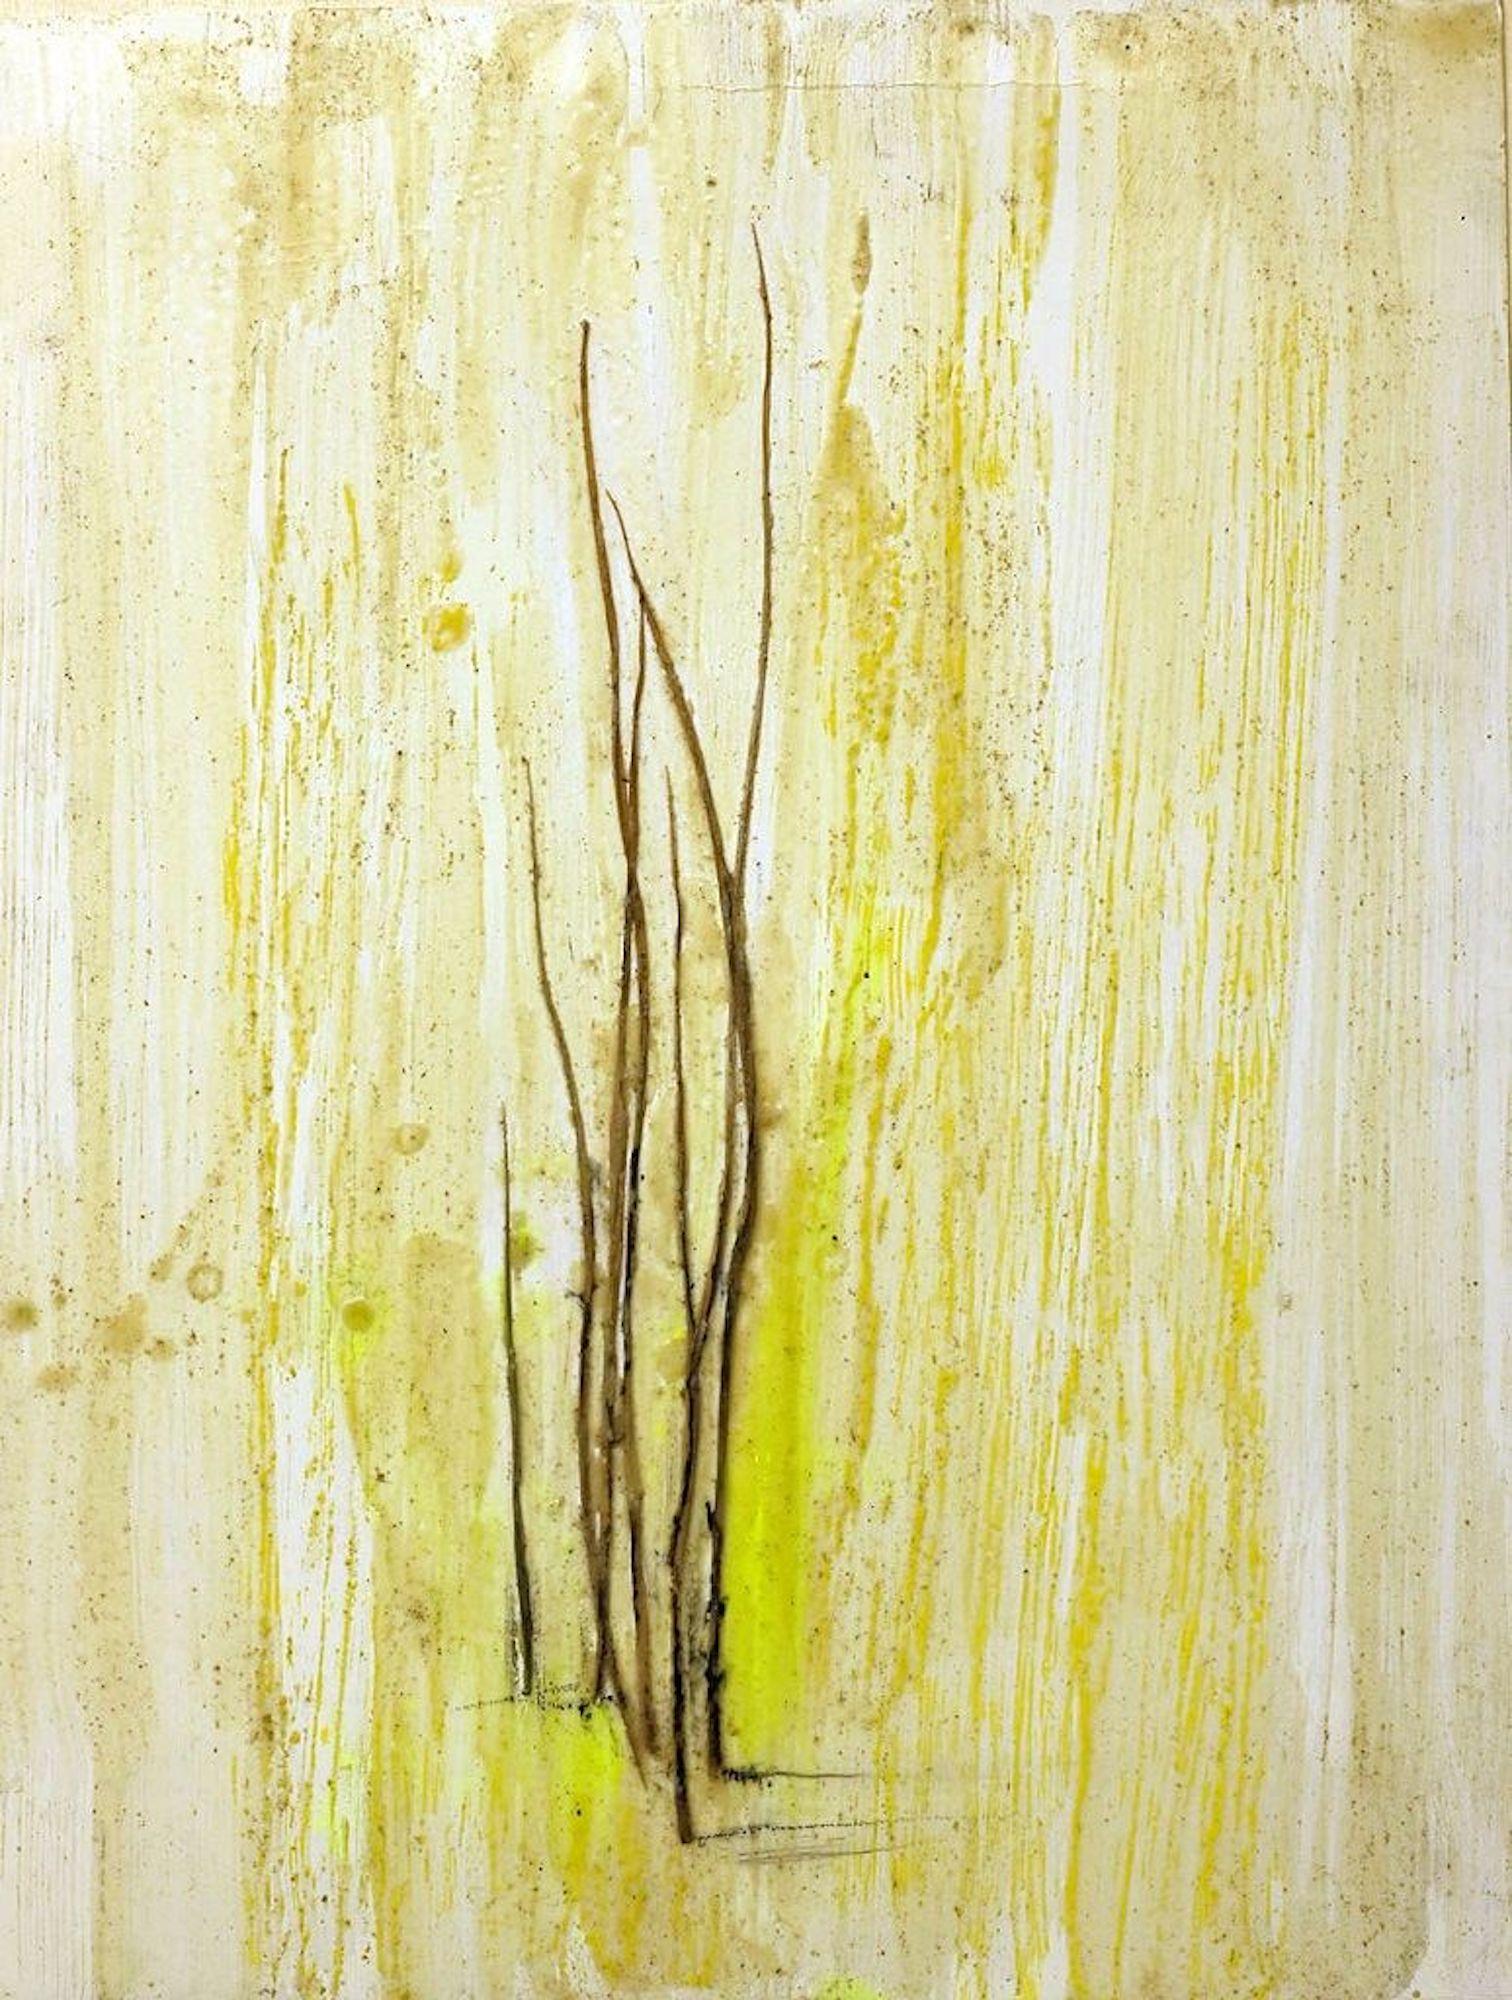 Grass Marks - wax pigments and grass blades - by Claudio Palmieri - 2010